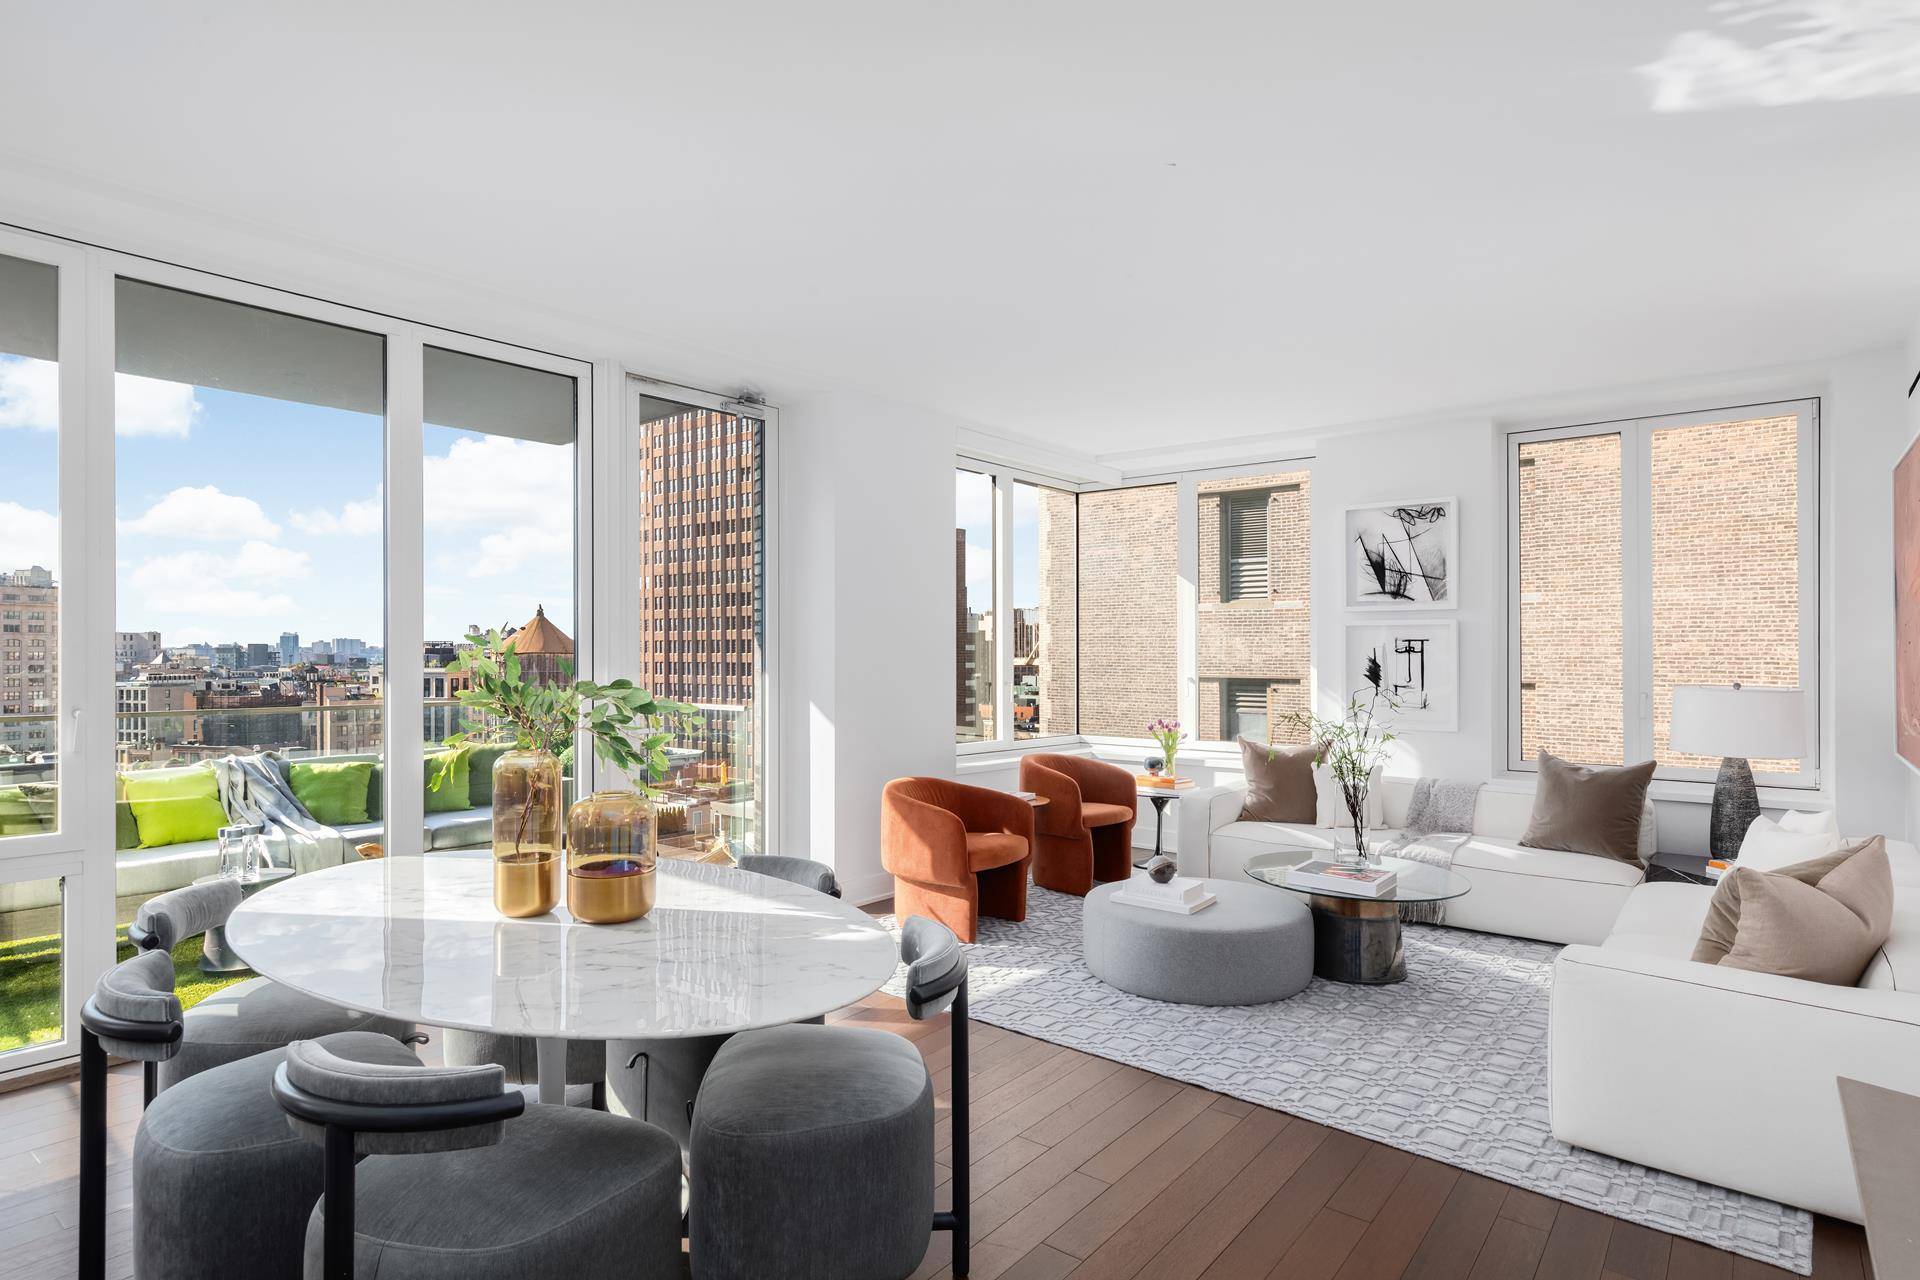 Enjoy the rarity of living in this stunning home with two large terraces overlooking an expansive and impressive TriBeCa skyline !